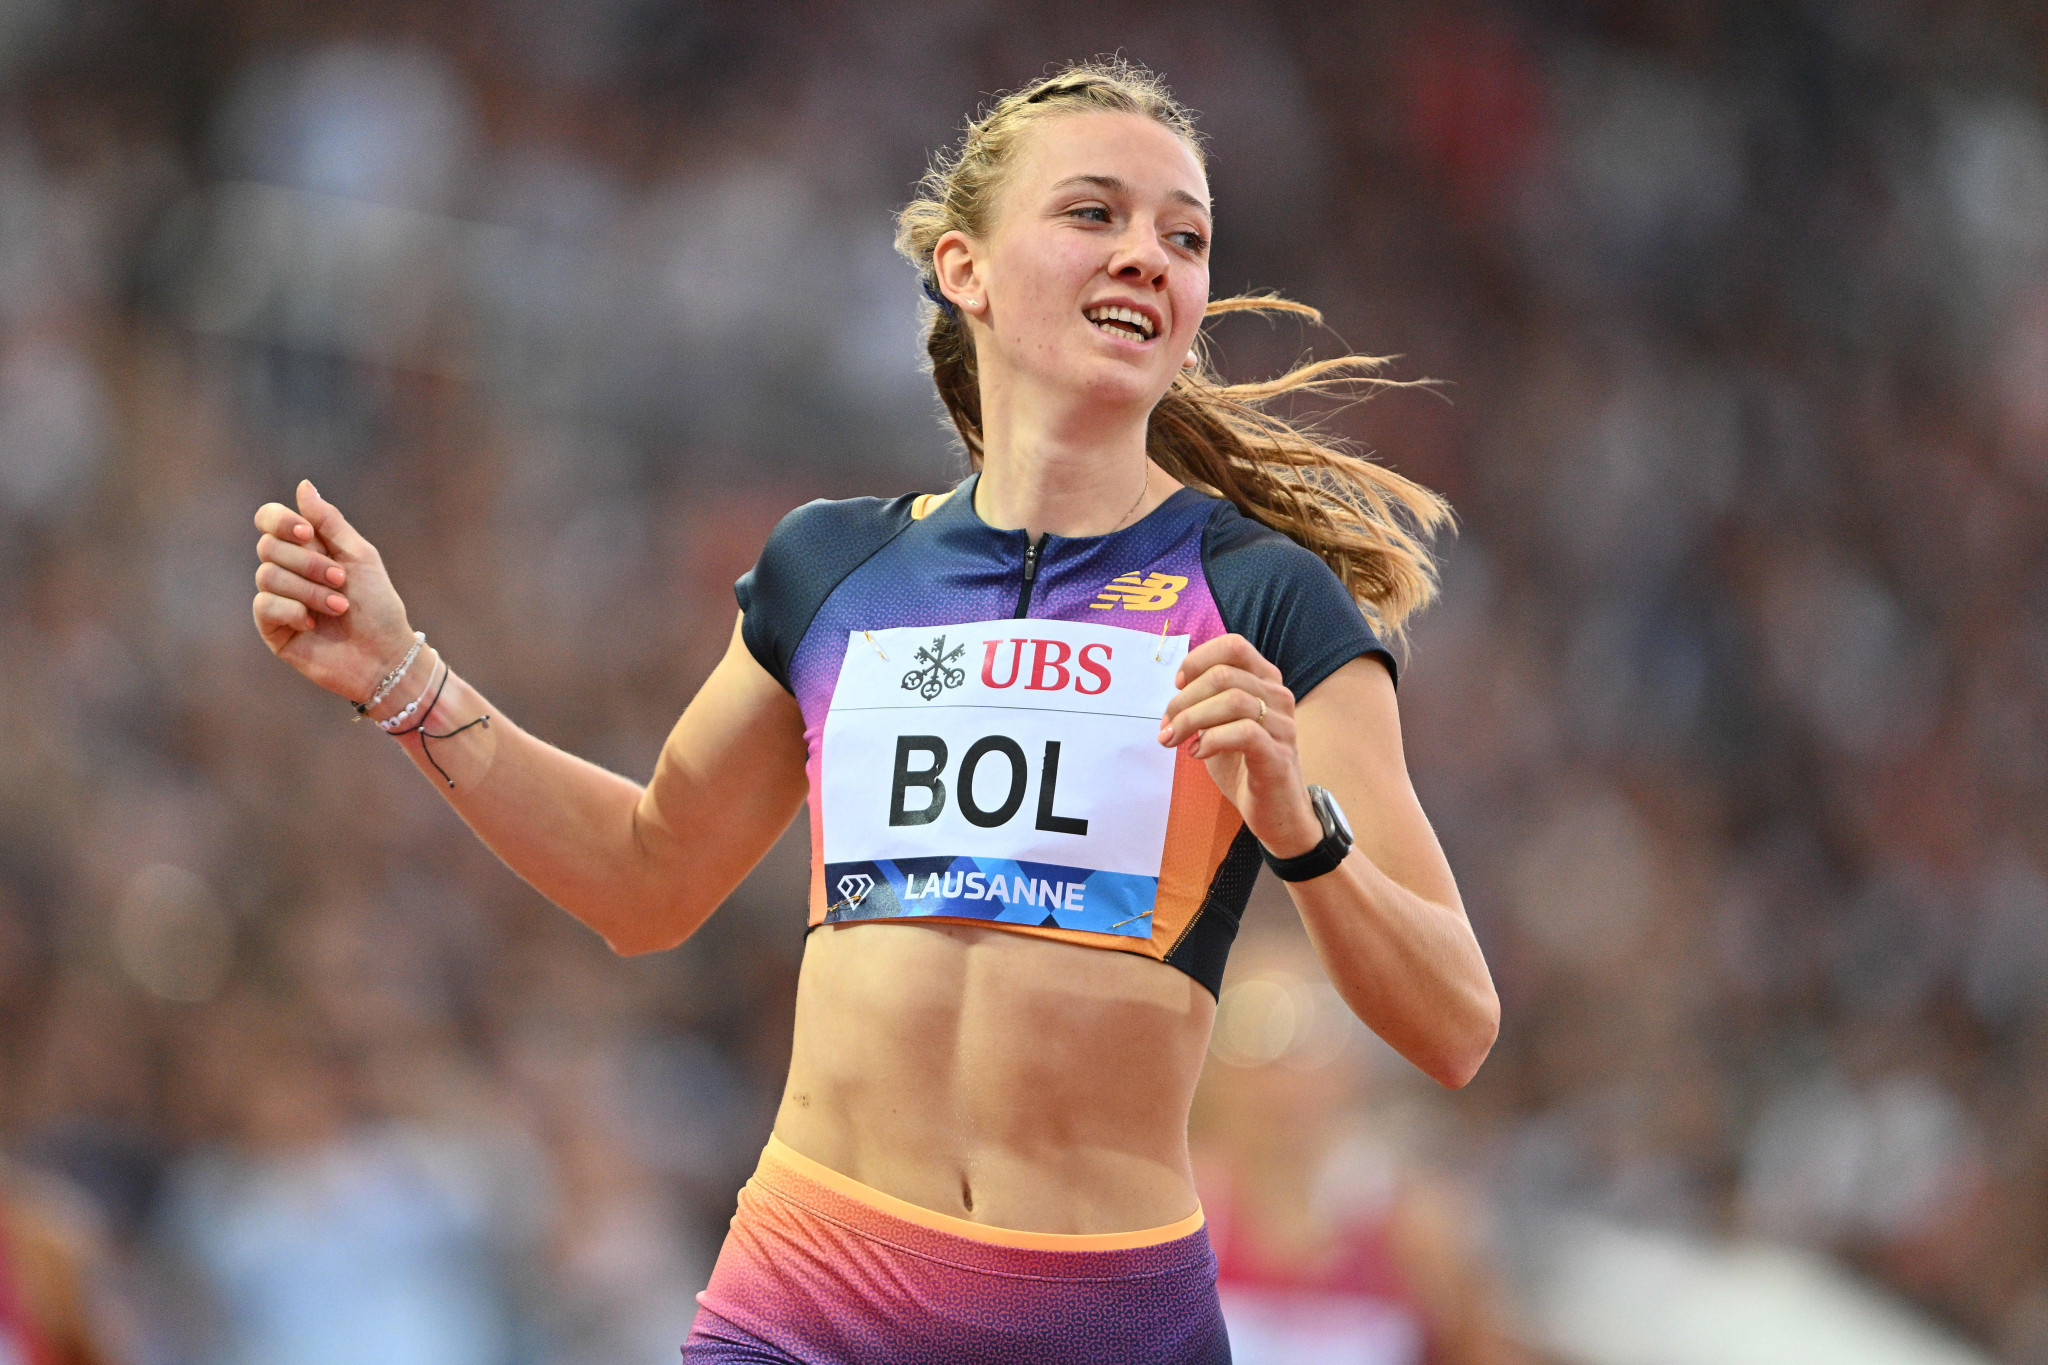 The schedule for next year's World Athletics Championships in Budapest will seek to encourage athletes wishing to double up such as Femke Bol of The Netherlands, who won an unique 400m/400m hurdles double at the recently concluded European Championships in Munich ©Getty Images